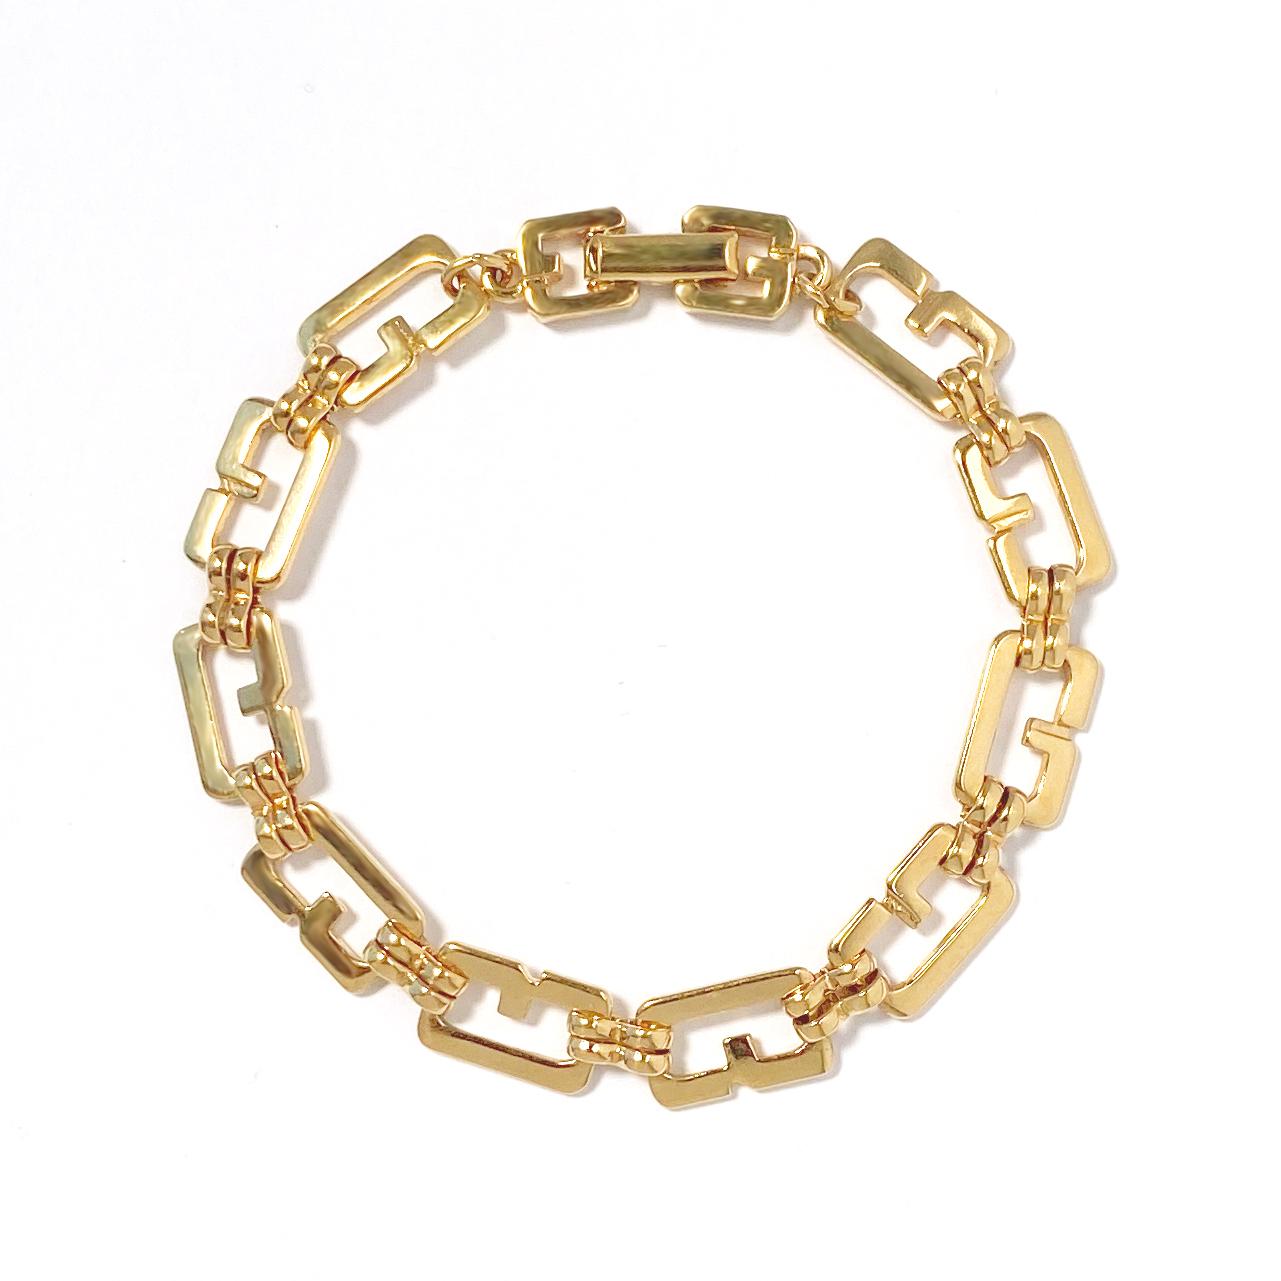 1980s Vintage Givenchy G-link chain bracelet in gold plate.  This vintage bracelet features G-shaped logo links with a double G logo clasp.   Bracelet measures 7 1/4 inches in length, width approximately 5/16 inch with a foldover clasp closure at